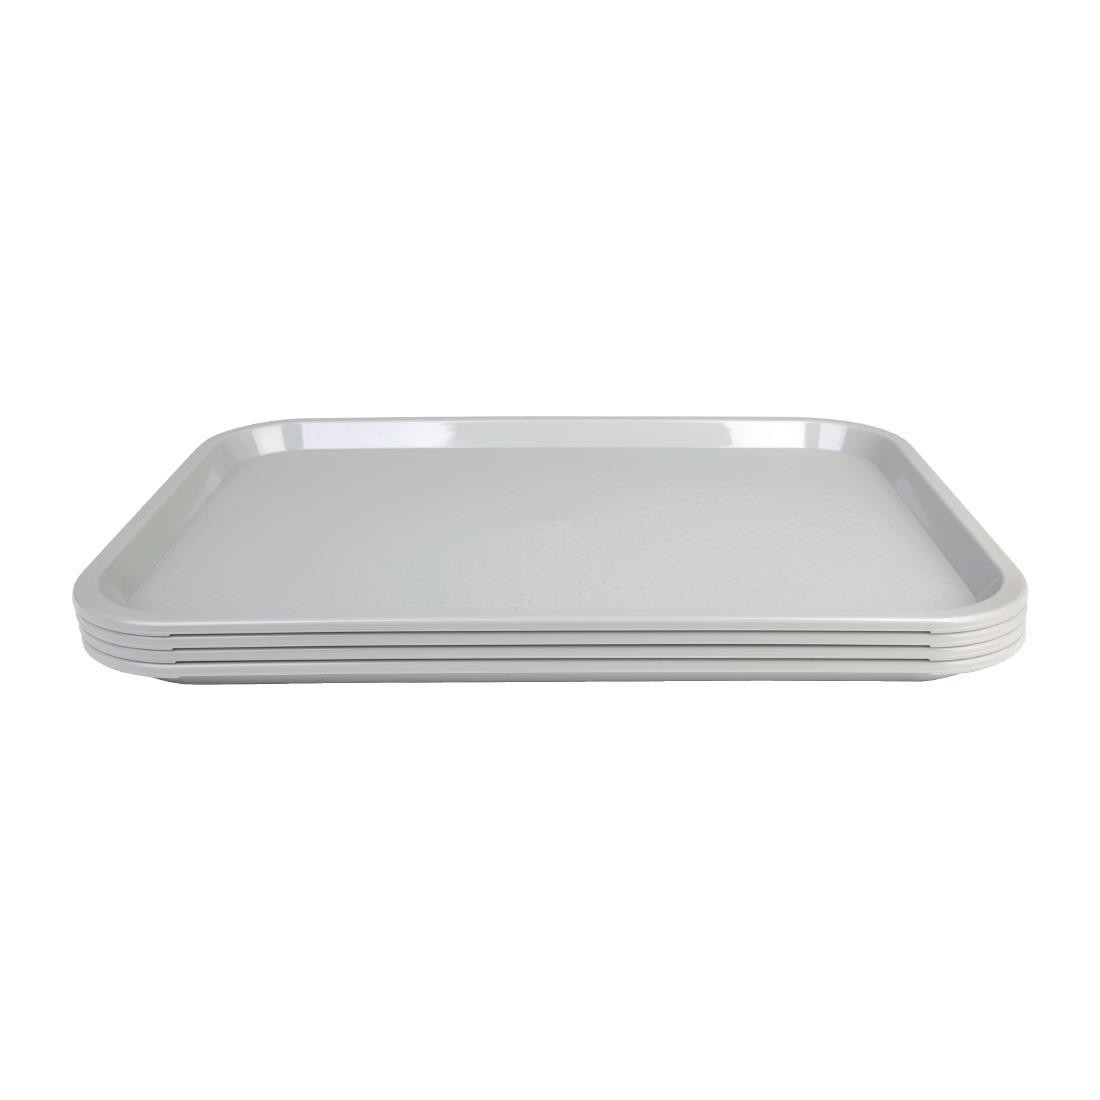 415x305mm Kristallon Foodservice Tray in White with Textured Surface 